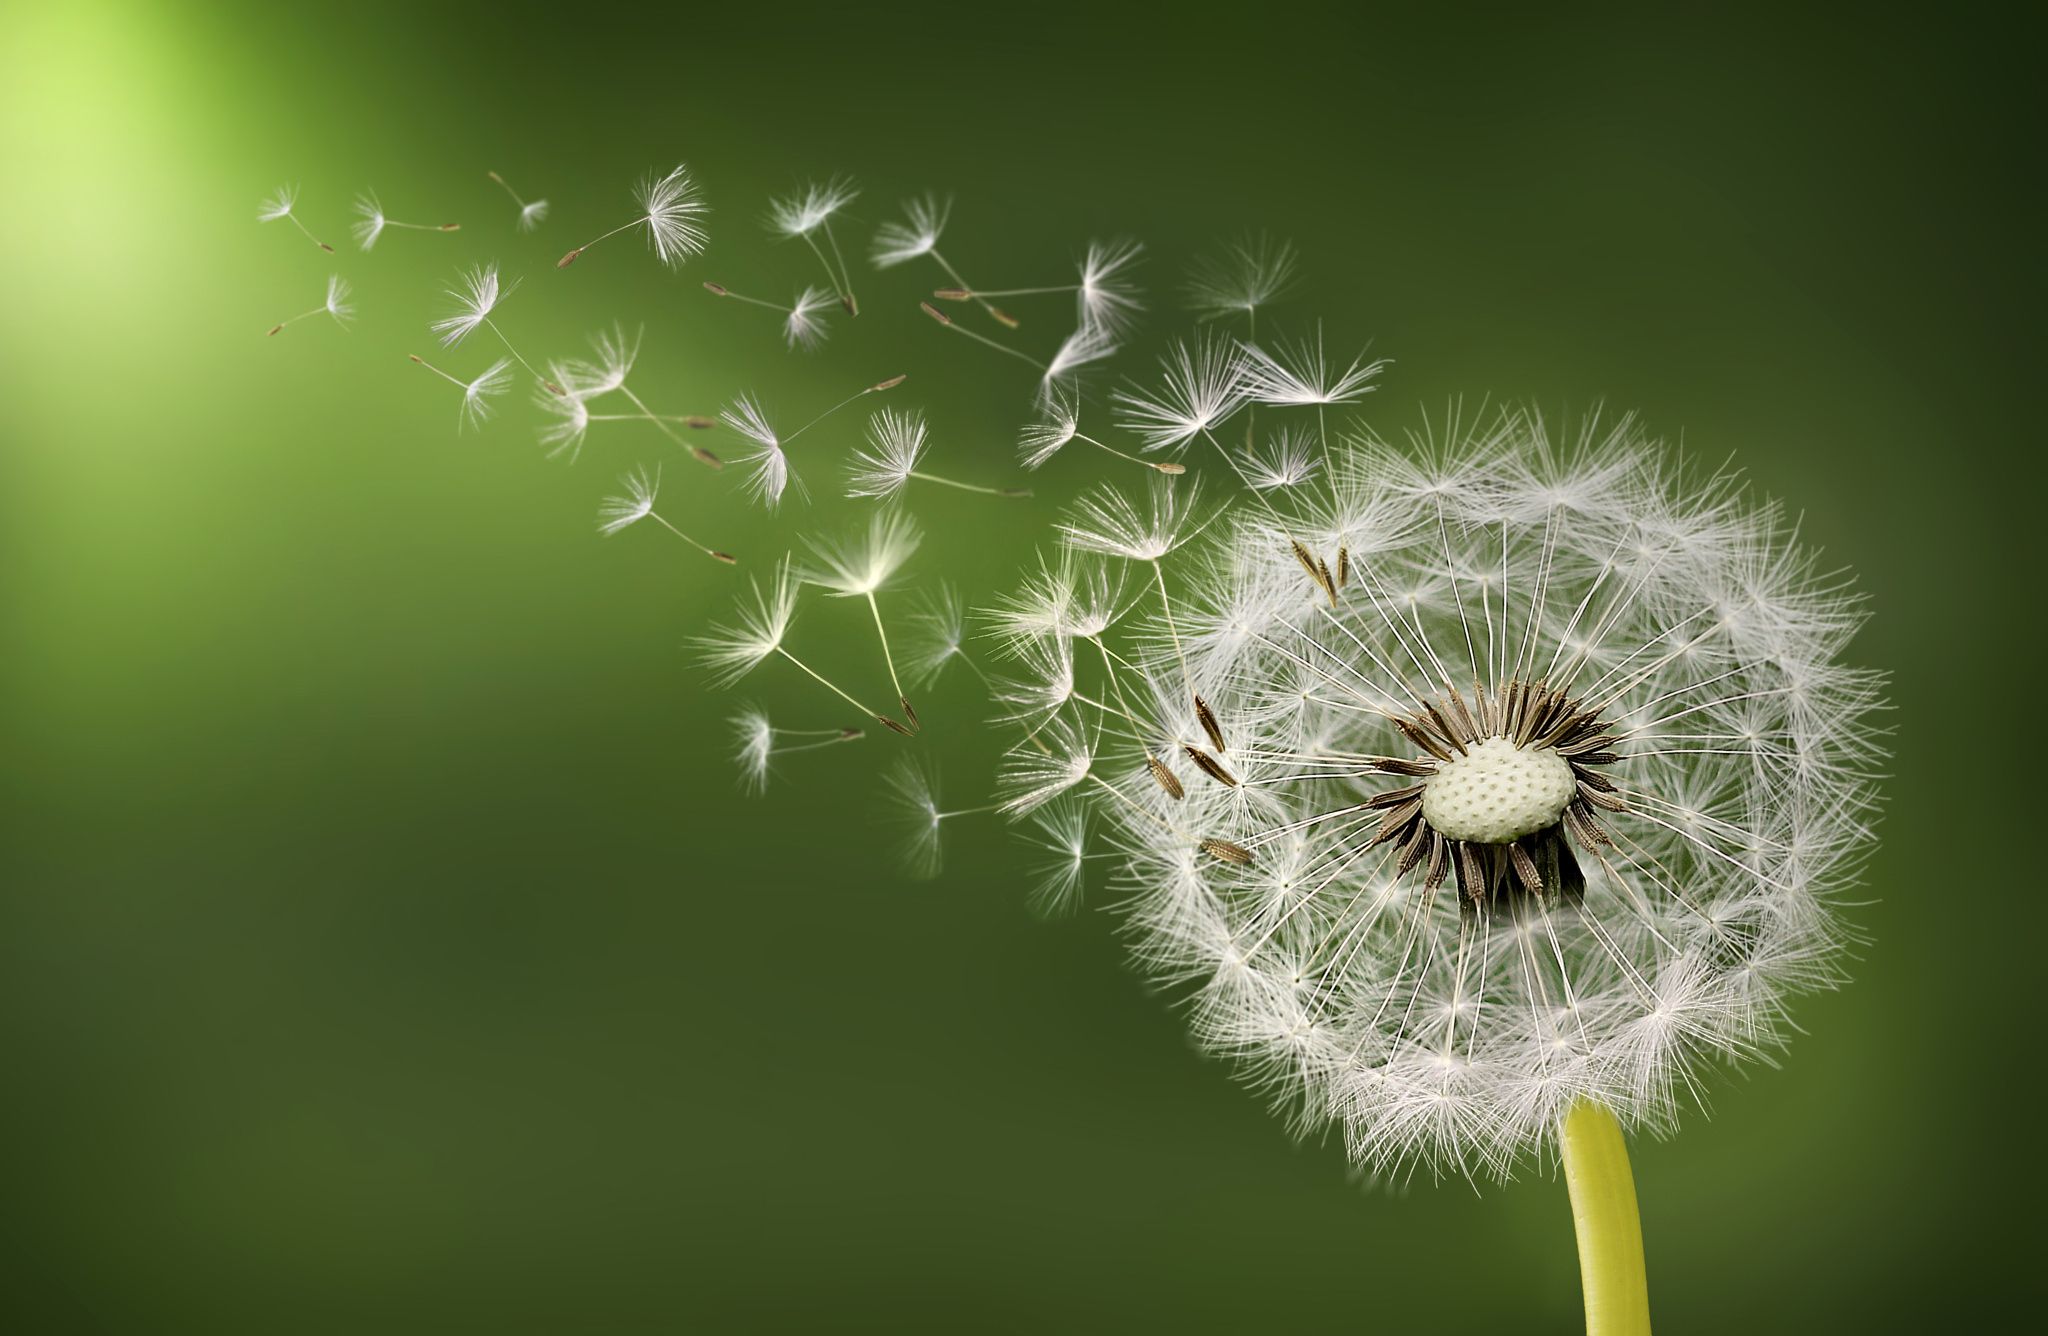 Photograph Dandelion clock in morning by Bess Hamiti on 500px ...